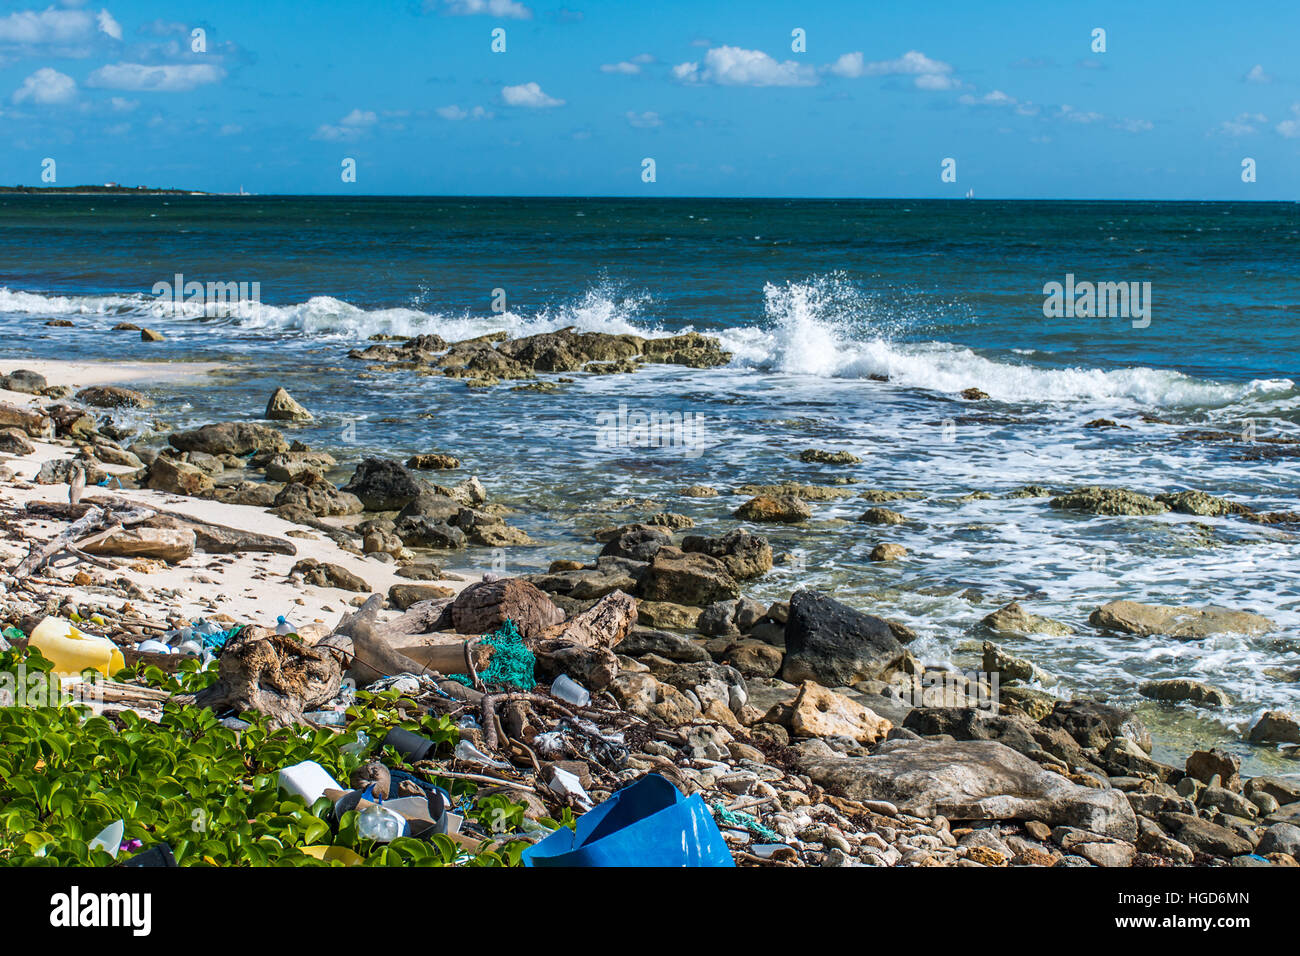 Mexico Coastline ocean Pollution Problem with plastic litter 8 Stock Photo